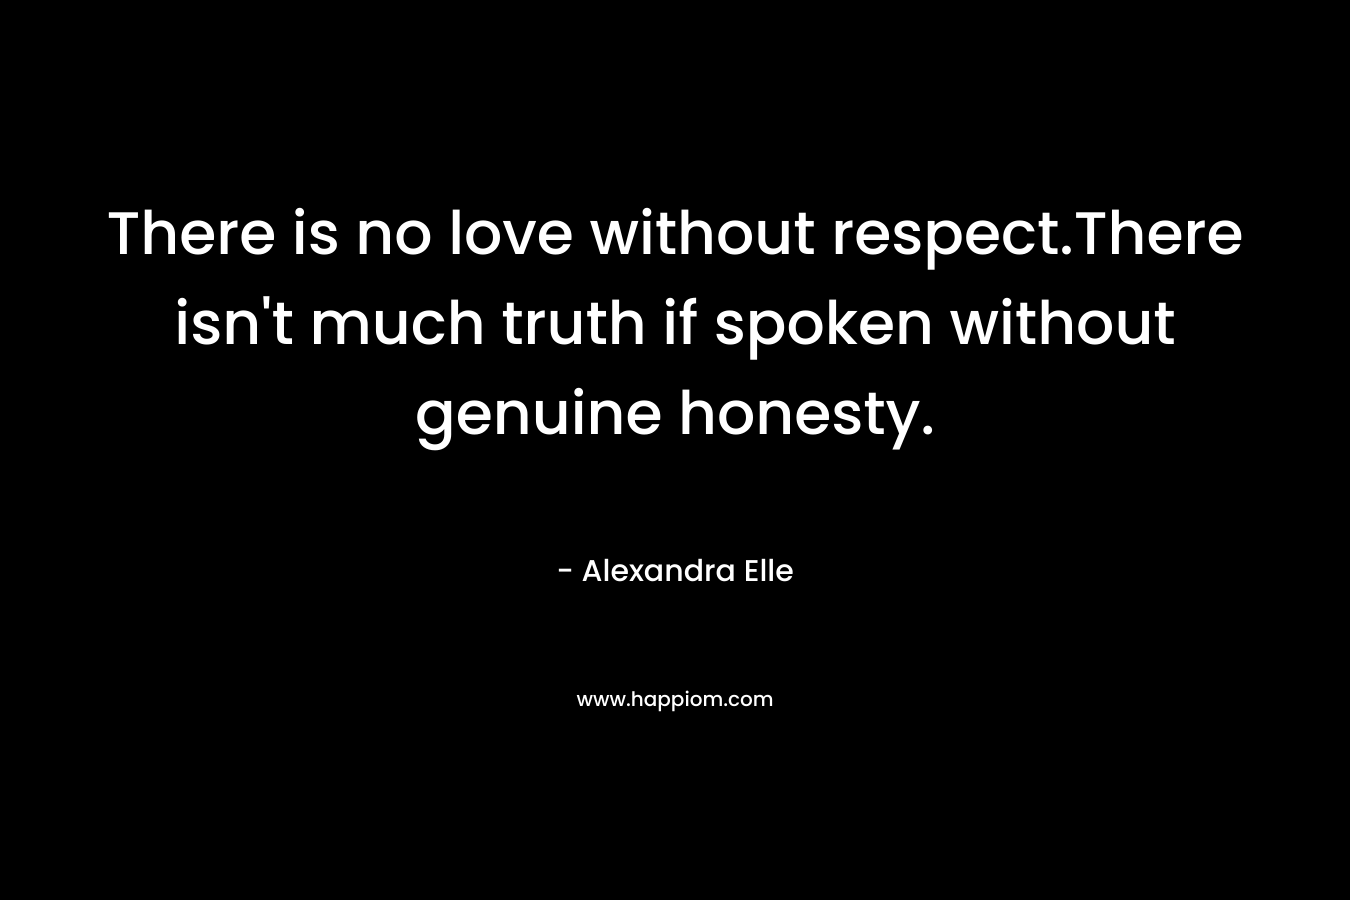 There is no love without respect.There isn't much truth if spoken without genuine honesty.